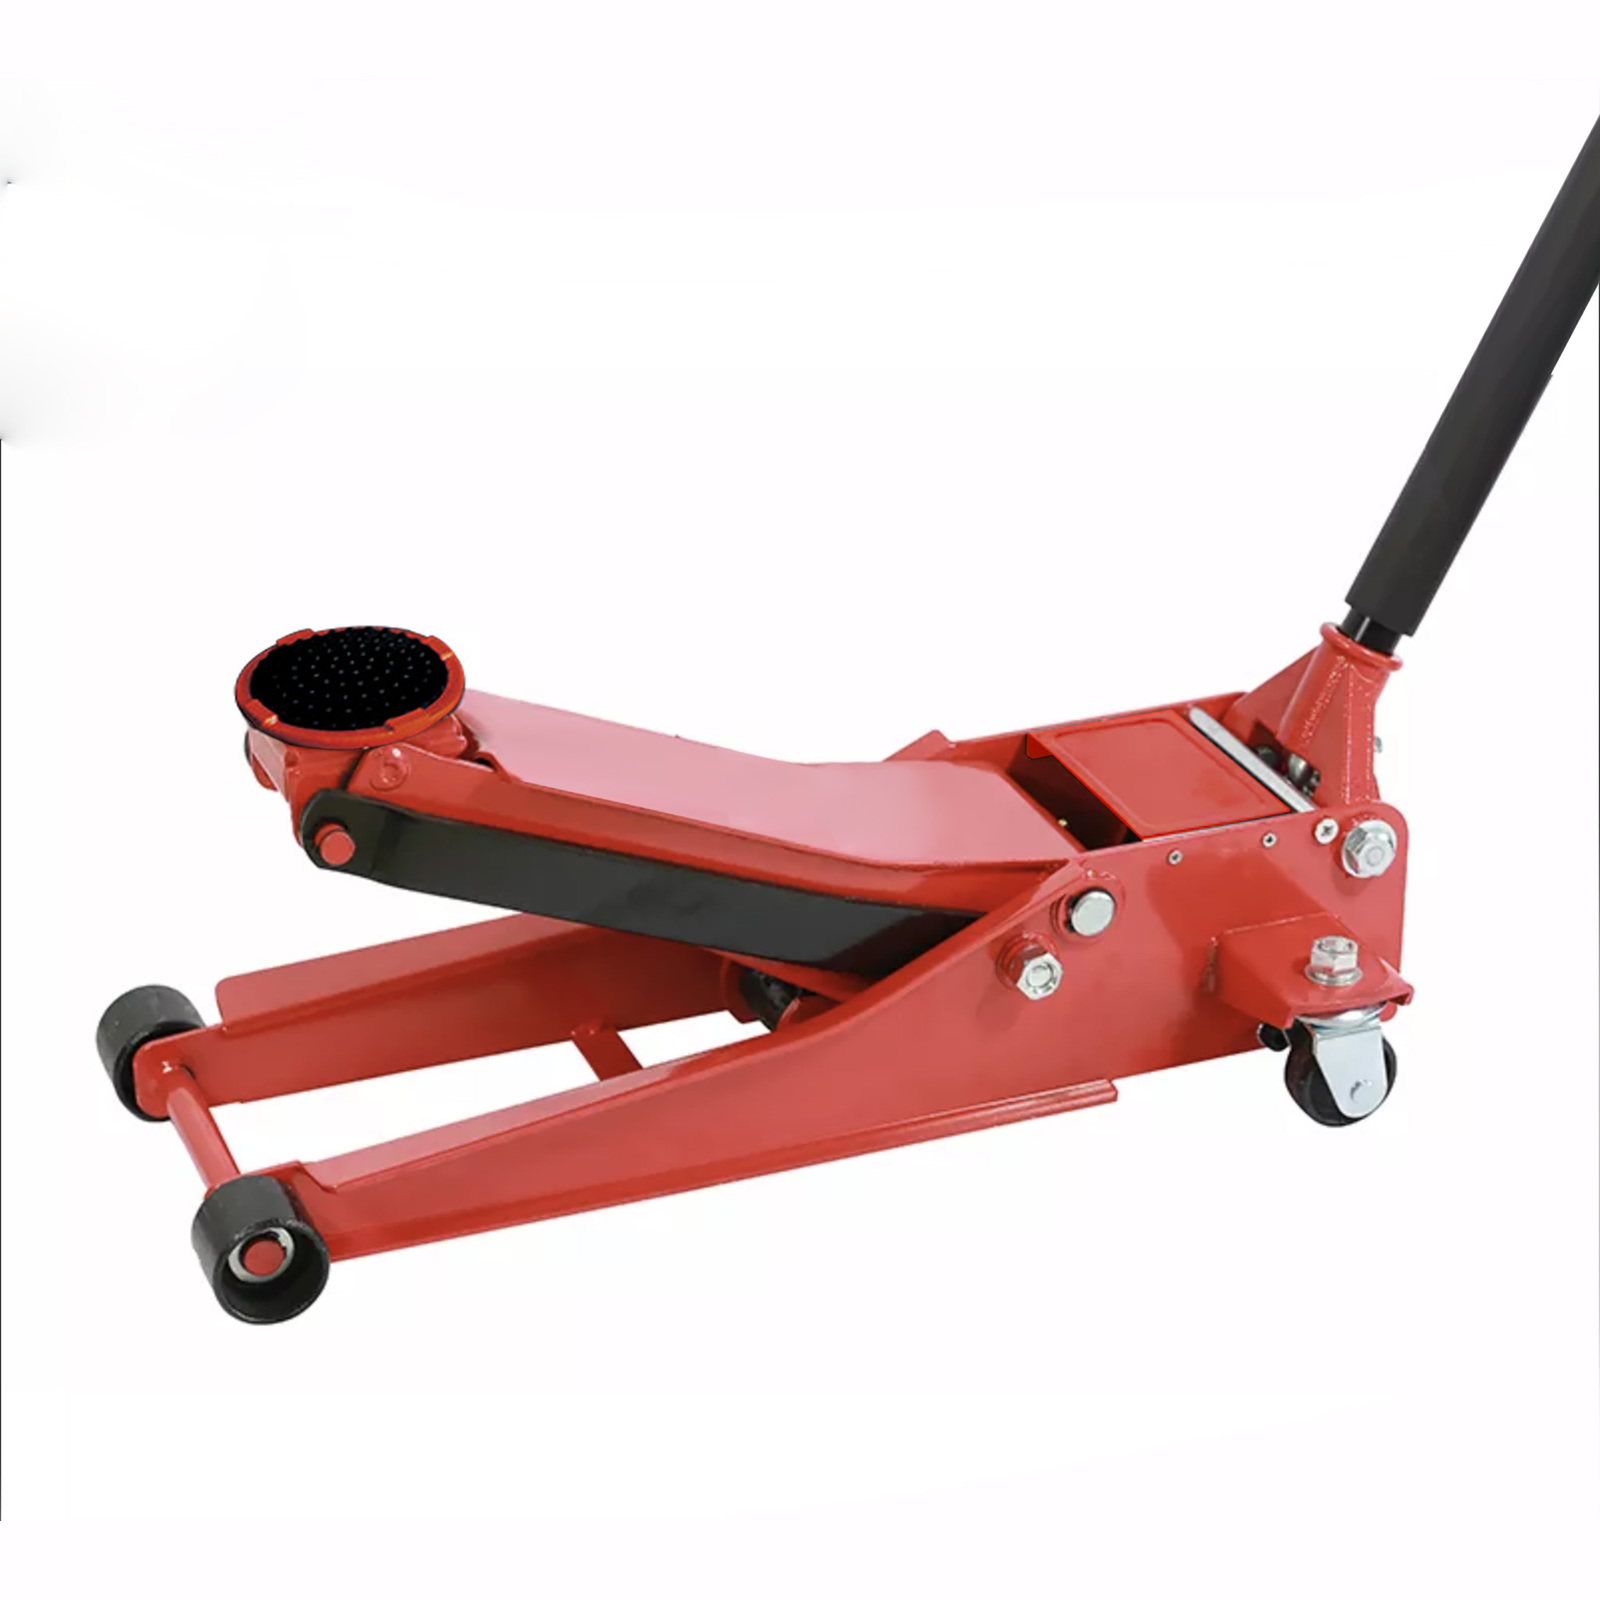 3 Ton Hydraulic Floor Jack Car Stand Jack Dual Pump Low Profile 75-505mm TUV GS Certified